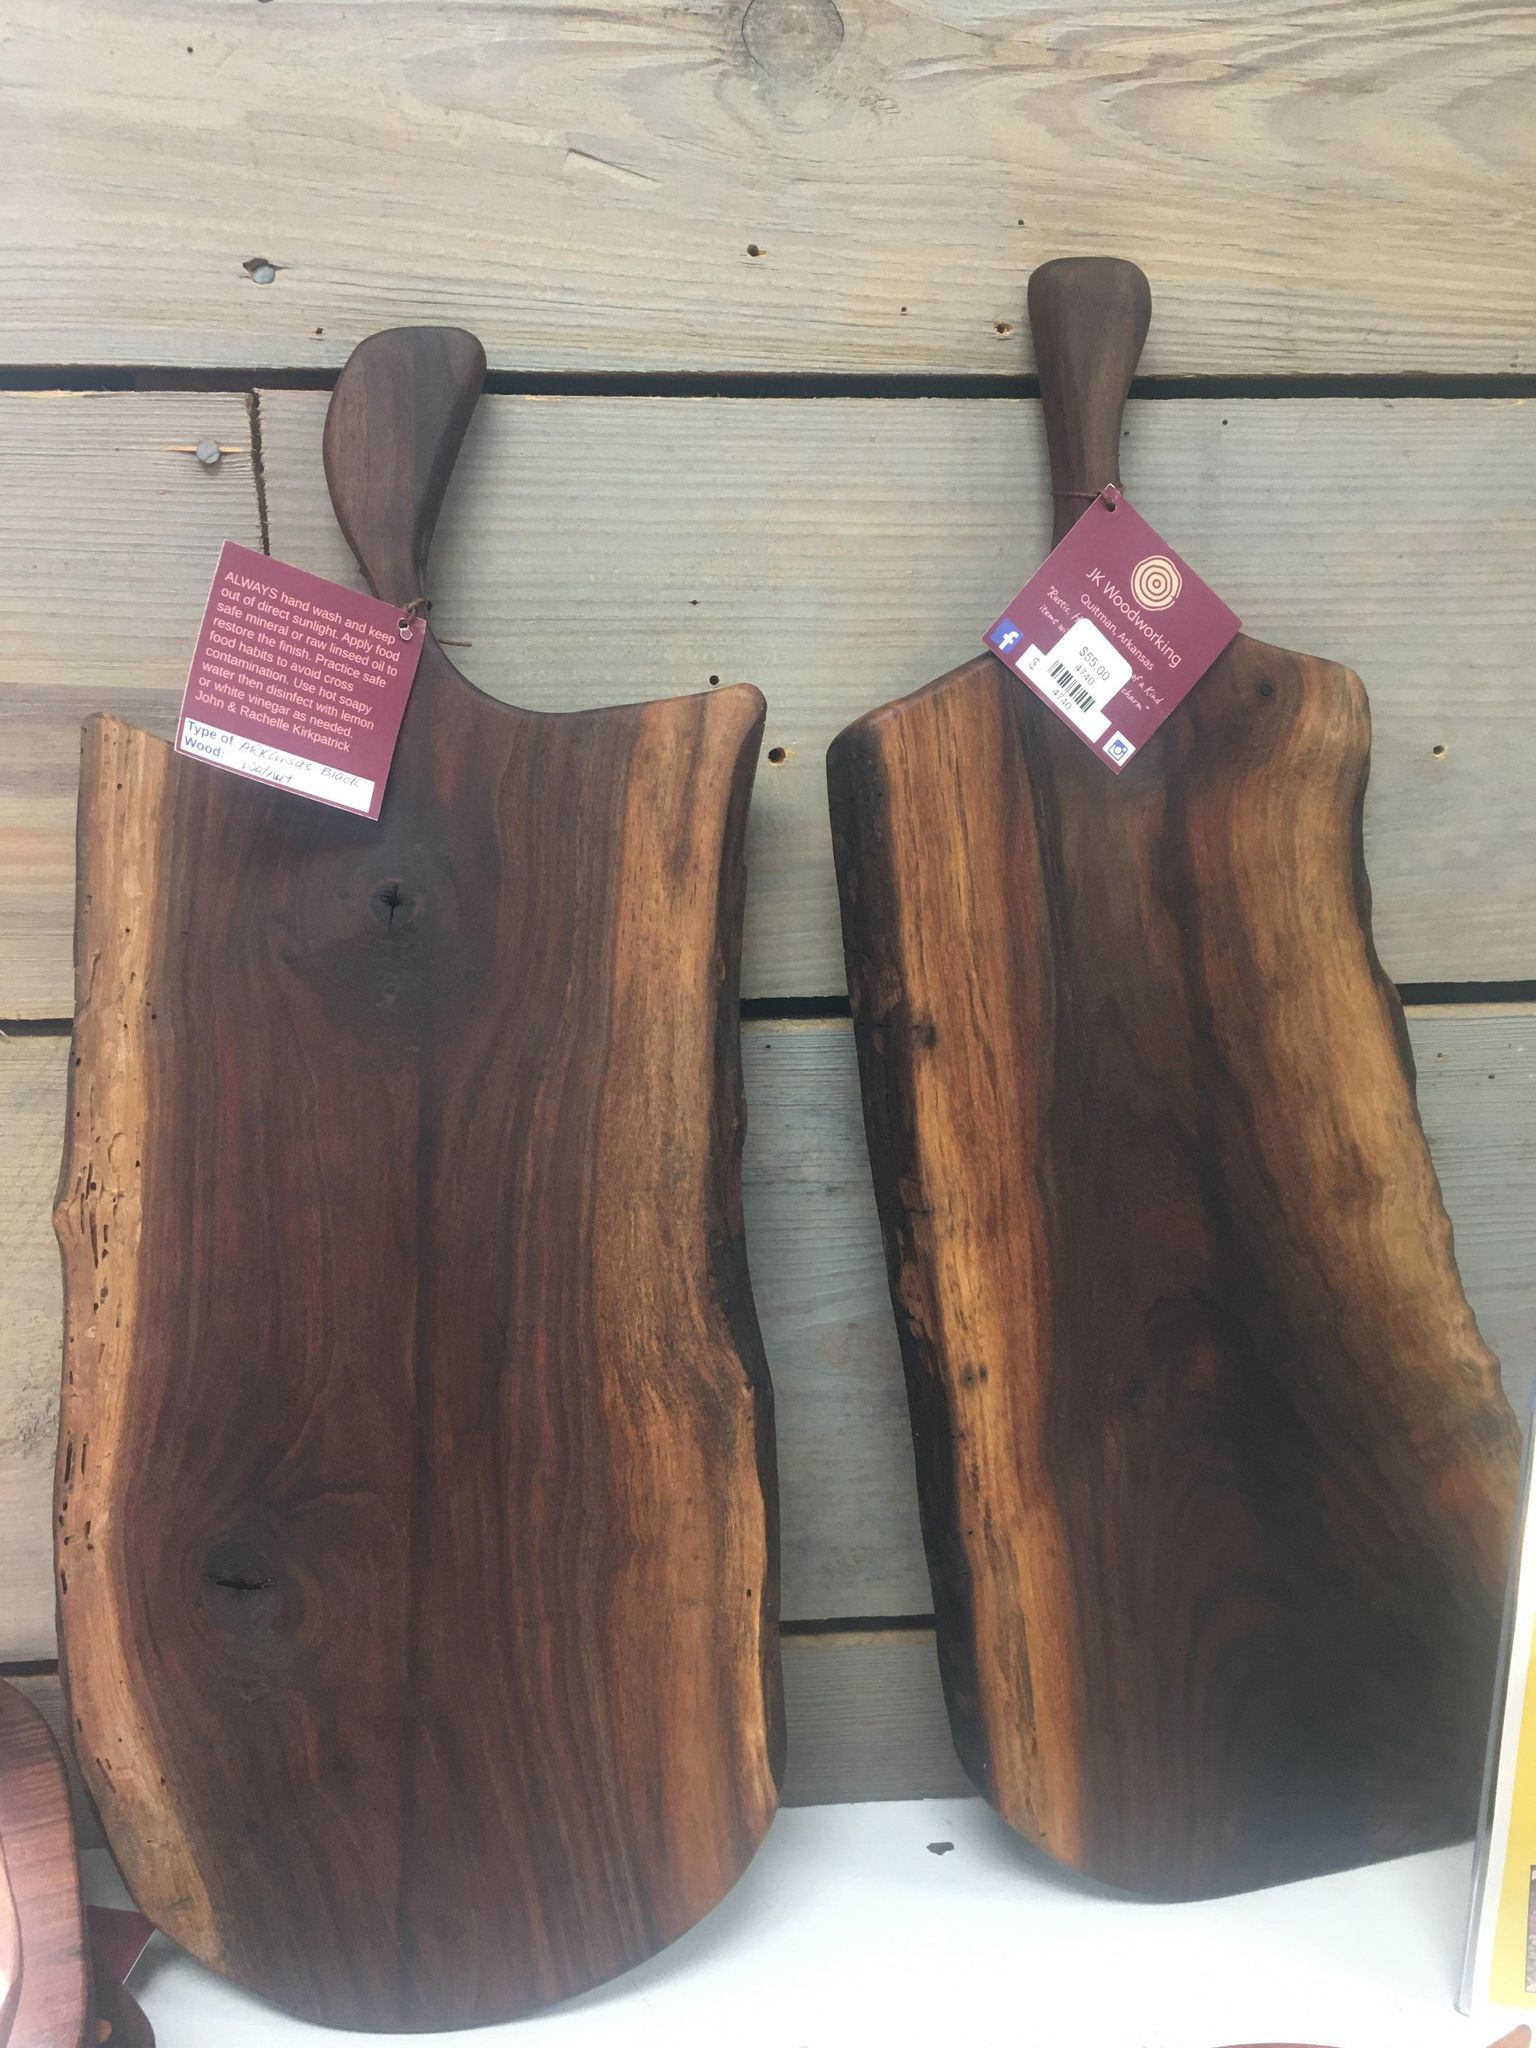 Two Handcrafted Charcuterie Boards, perfect for charcuterie! Hang them on your wall and impress your guests with the artisan craftsmanship.